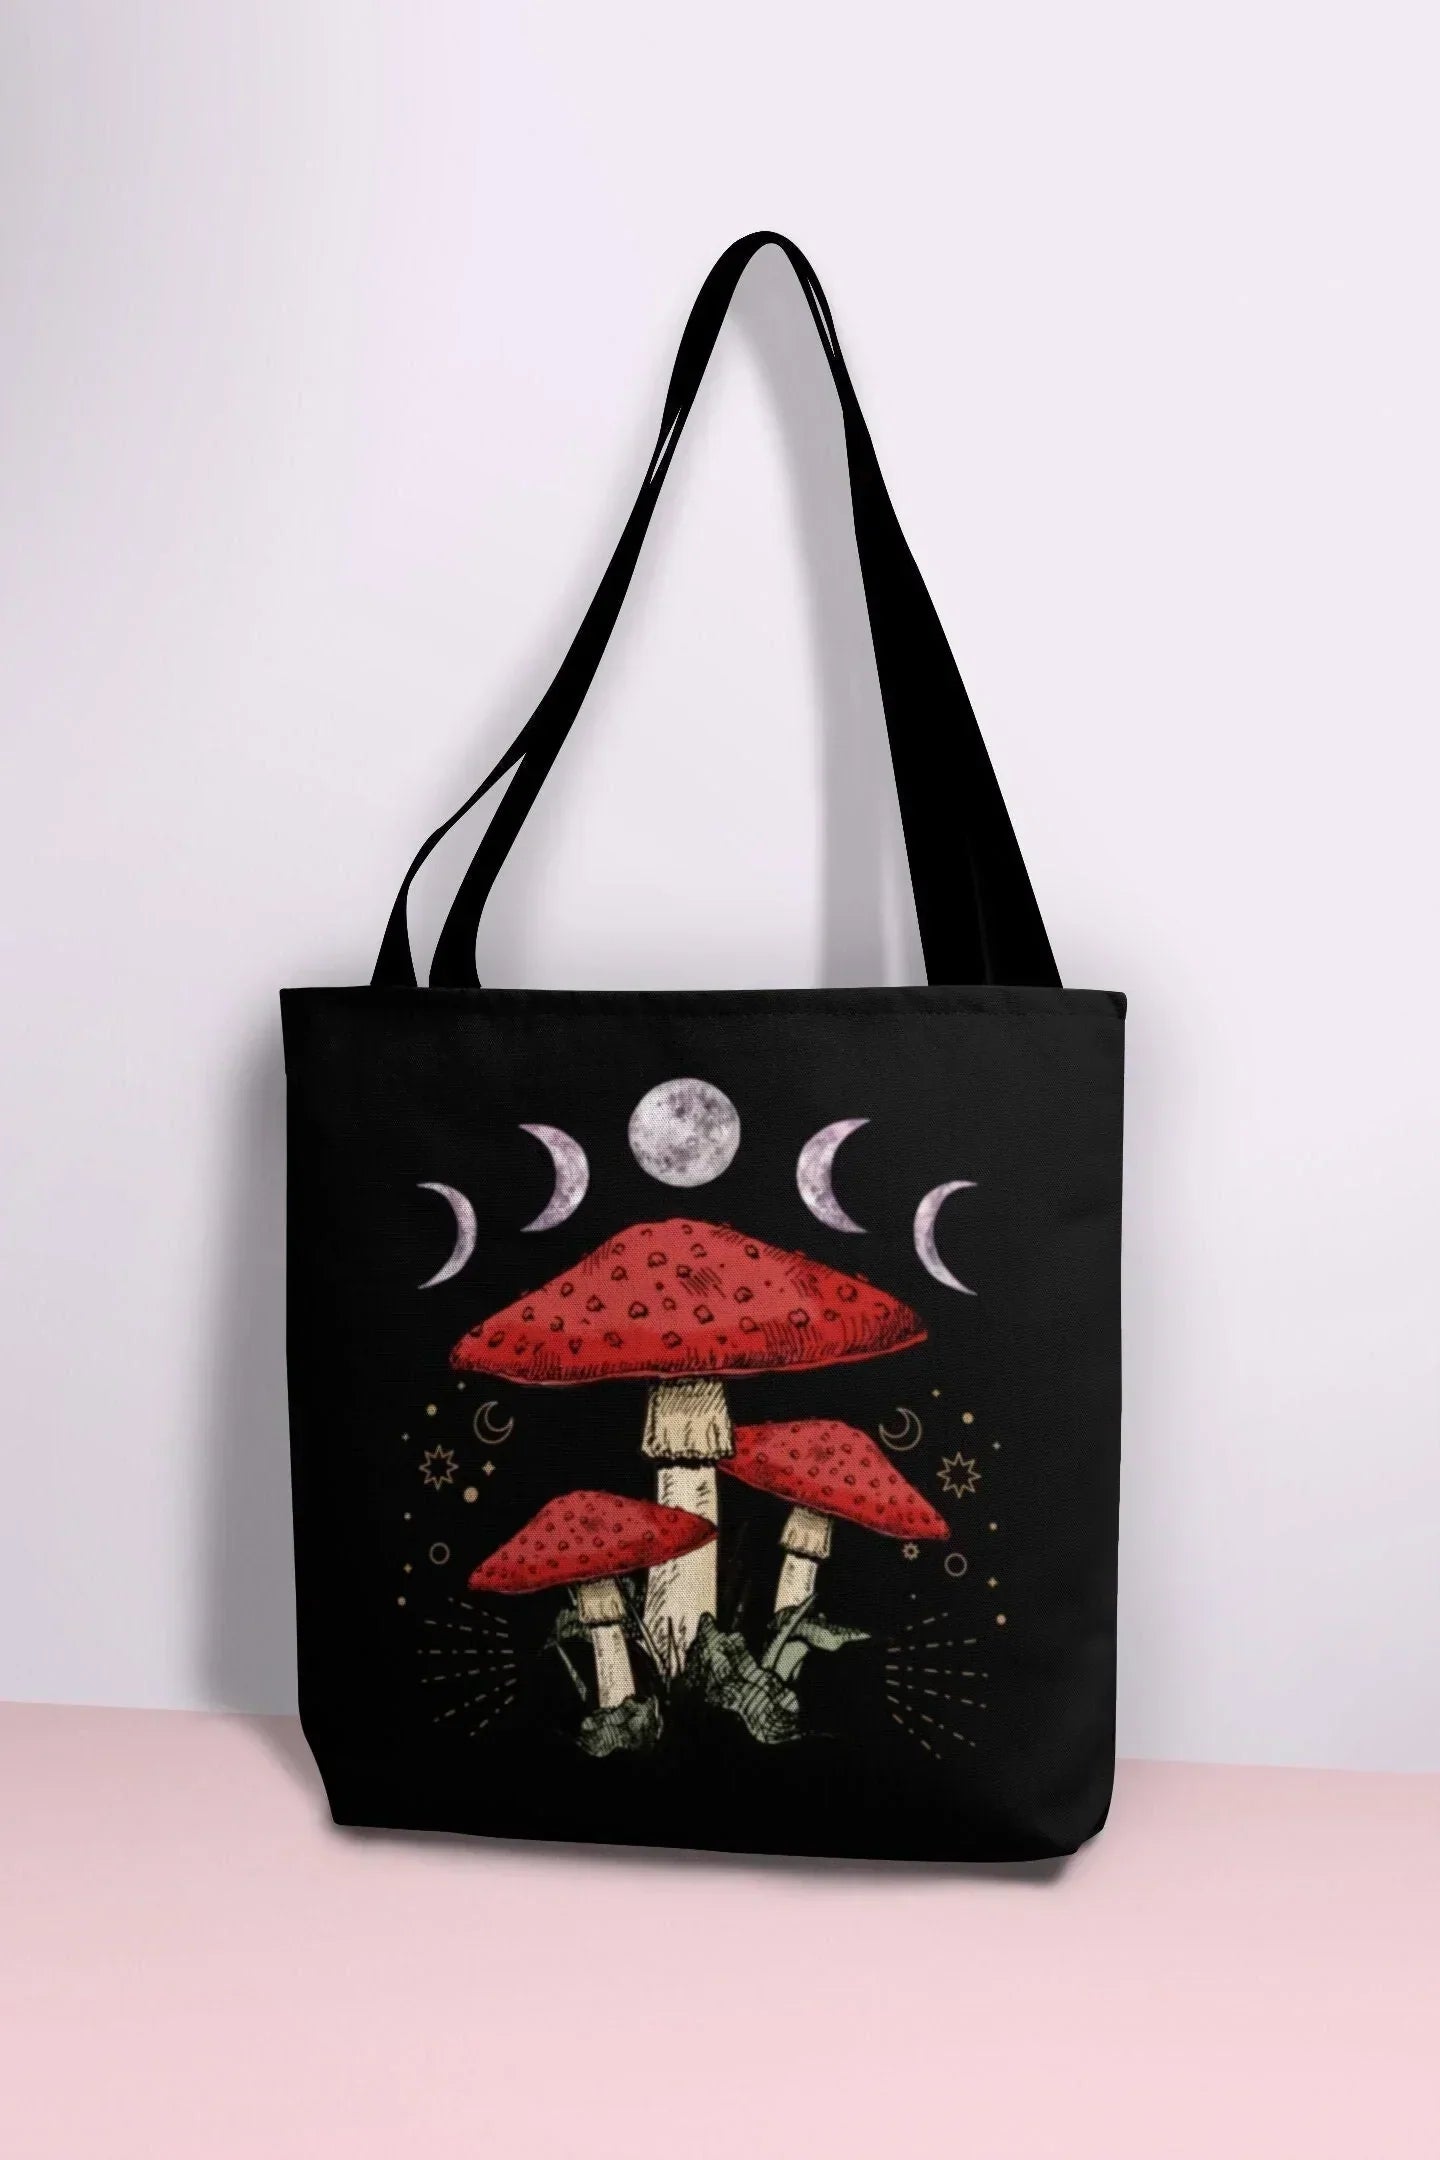 Mushroom Tote Bag, Magic Mushroom Bag, Trippy Tote, Cottagecore Lovers Gifts, Dark Academia Reusable Bag, Hippie Canvas Bag Psychedelic Gift